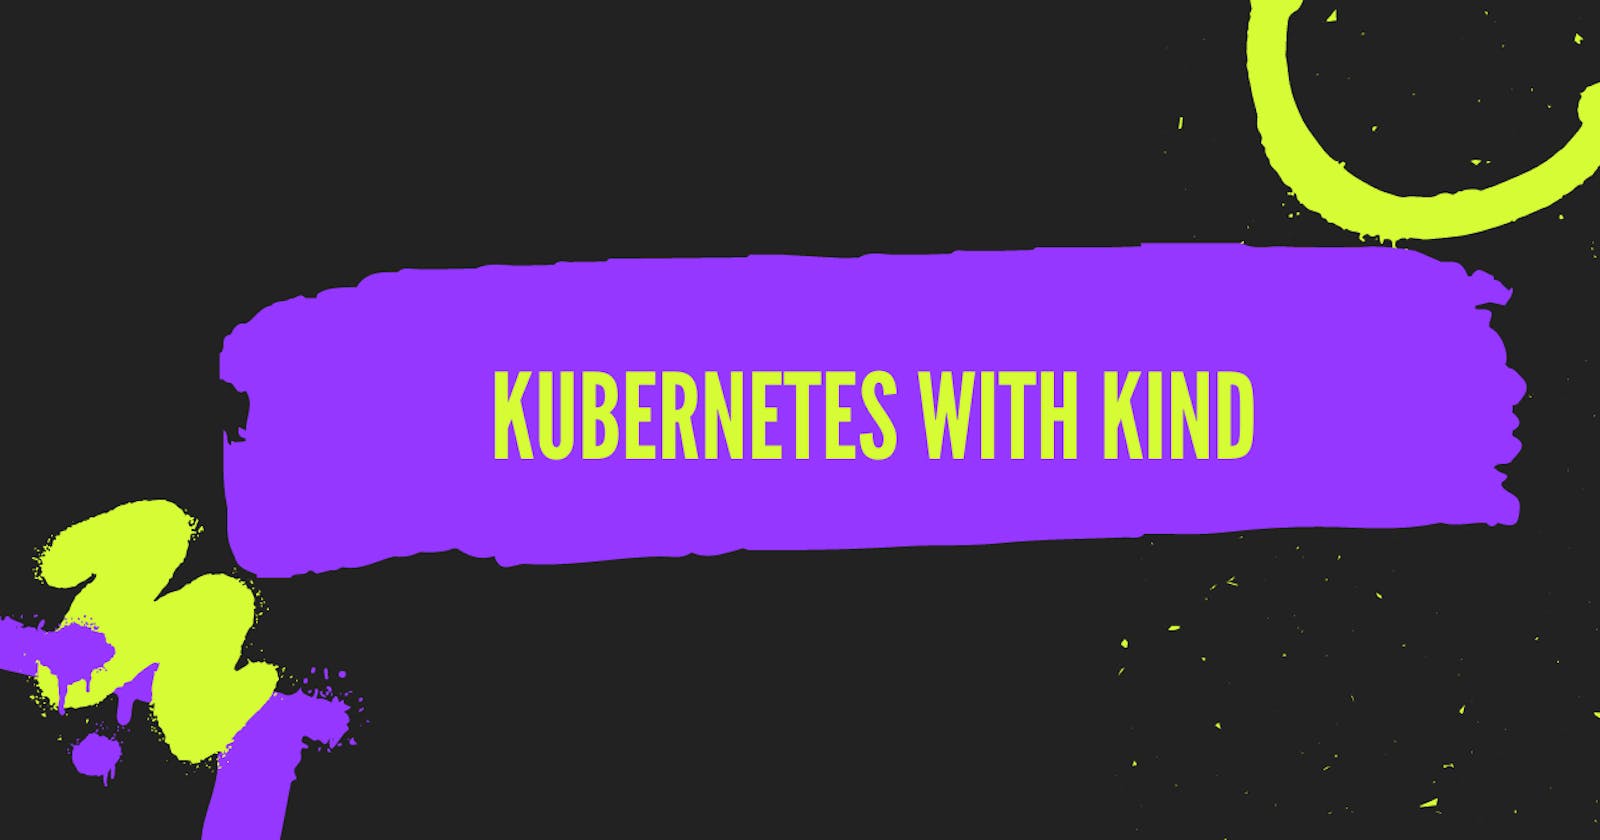 Creating Kubernetes Cluster Using Kind on local computer